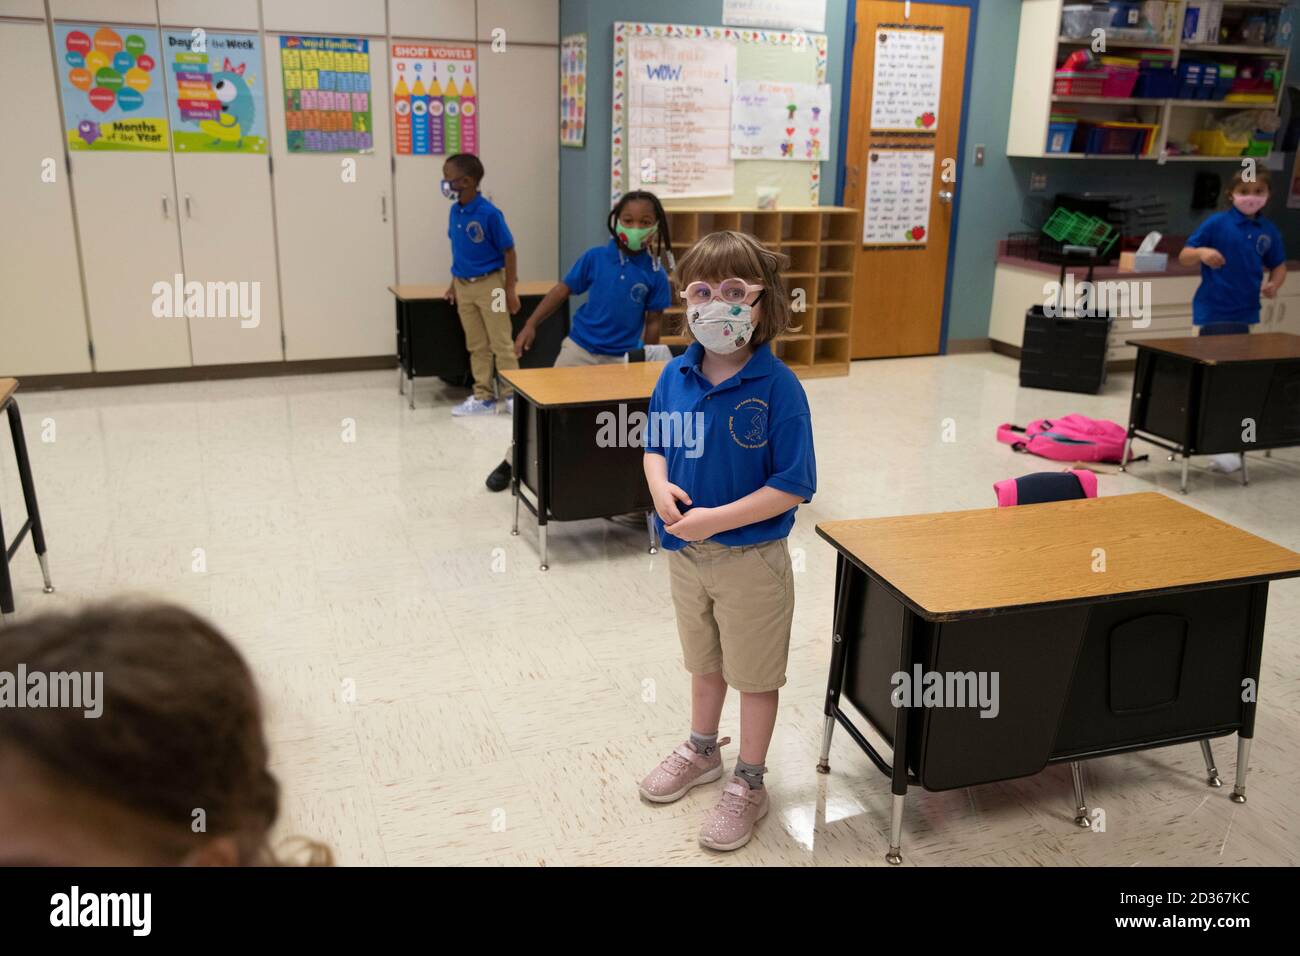 Austin, TX USA October 6, 2020: Kindergarten students stand by their widely-spaced desks as they return to the classroom for the first time since March at Campbell Elementary in Austin. The public school is using a combination of remote and in-person learning in the age of coronavirus. Credit: Bob Daemmrich/Alamy Live News Stock Photo